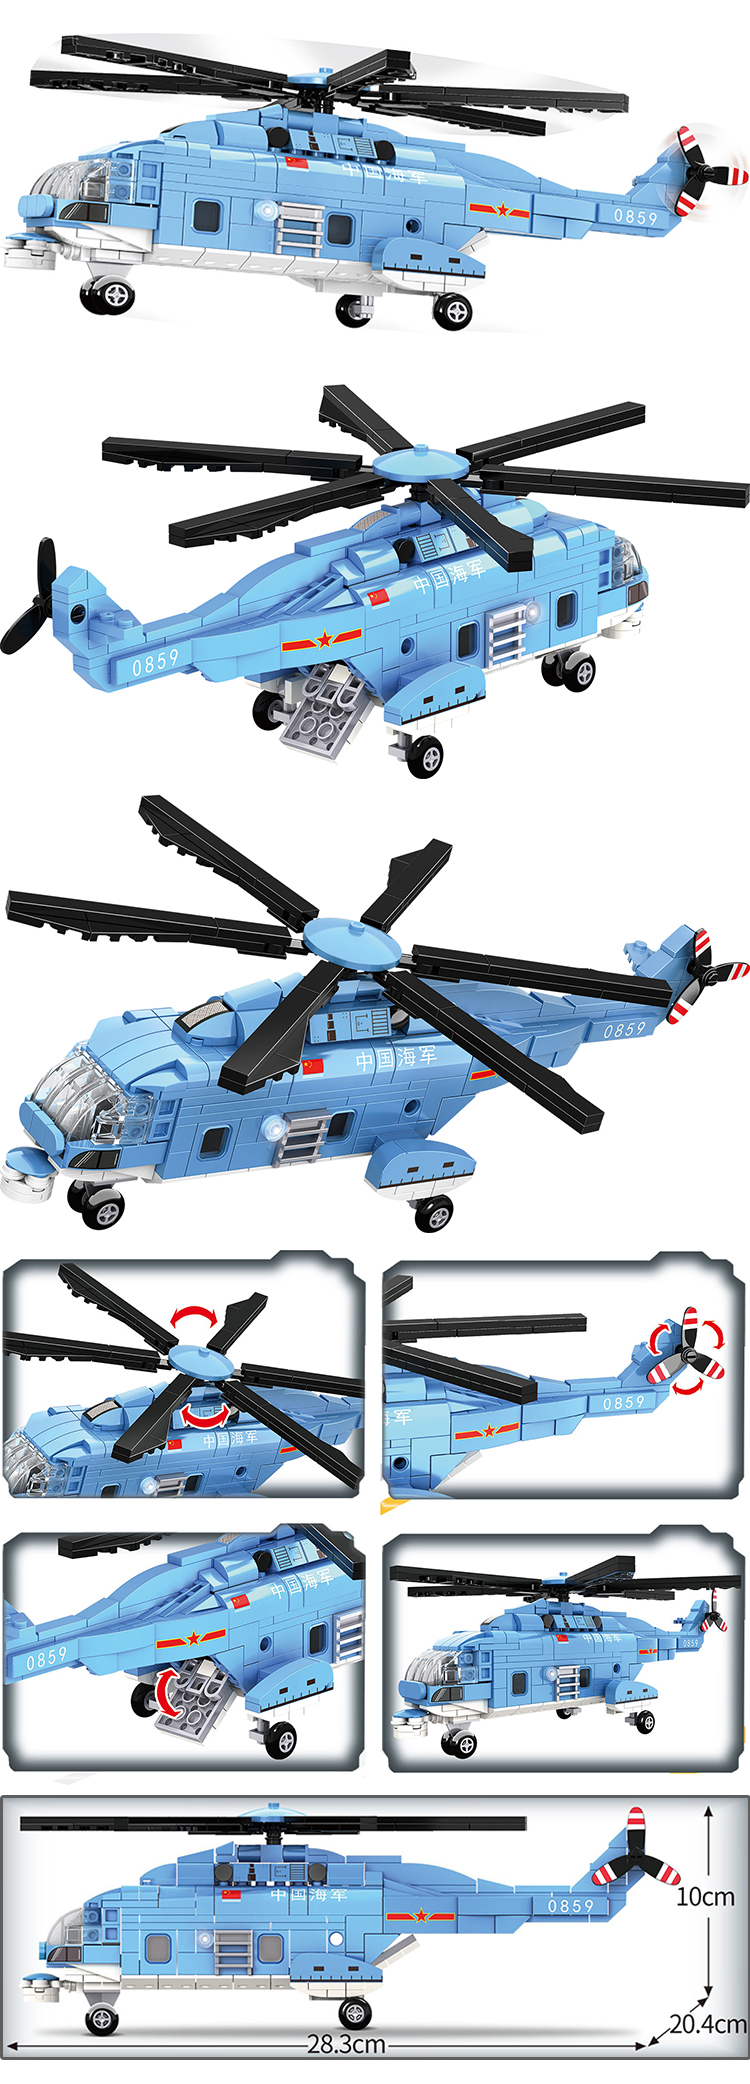 WOMA TOYS 2021 kids bricks Cheap promotional military air force helicopter model building blocks toys for Kids